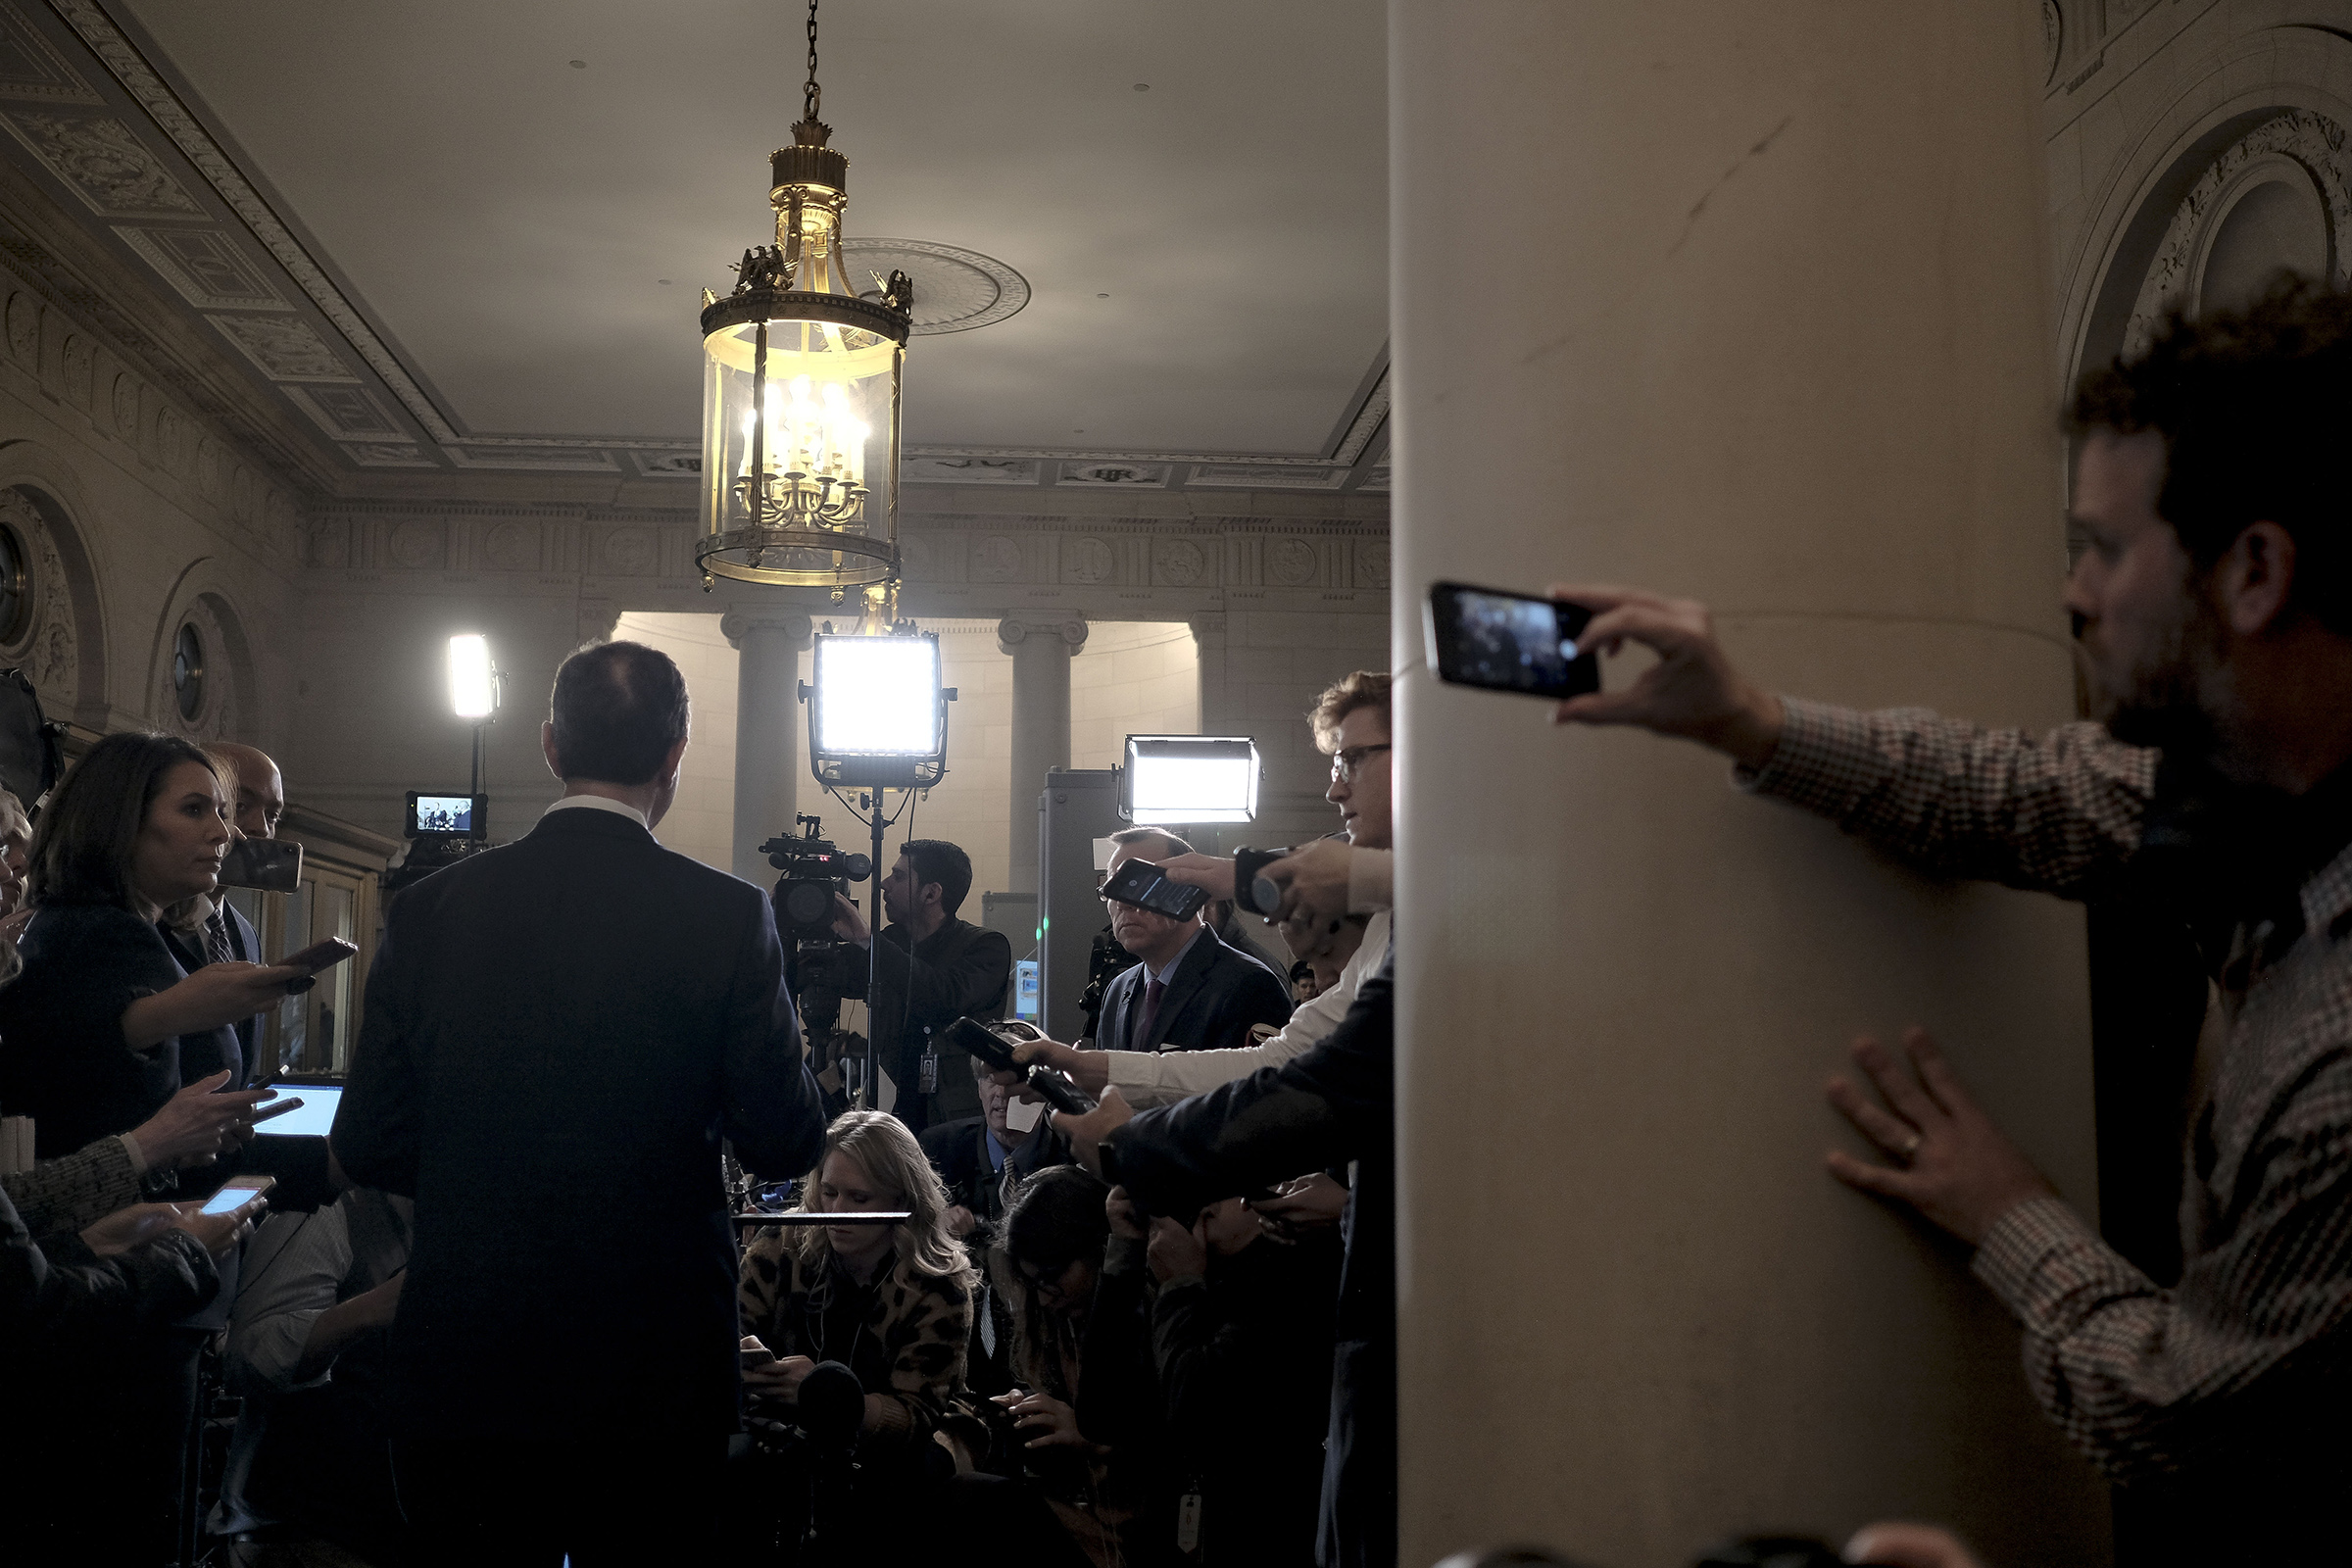 Chairman Adam Schiff (D-Calif.) speaks with the press during a break from the House Intelligence Committee hearing on the impeachment inquiry with Ambassador Gordon Sondland on Capitol Hill in Washington, D.C. on Nov. 20, 2019. (Gabriella Demczuk for TIME)